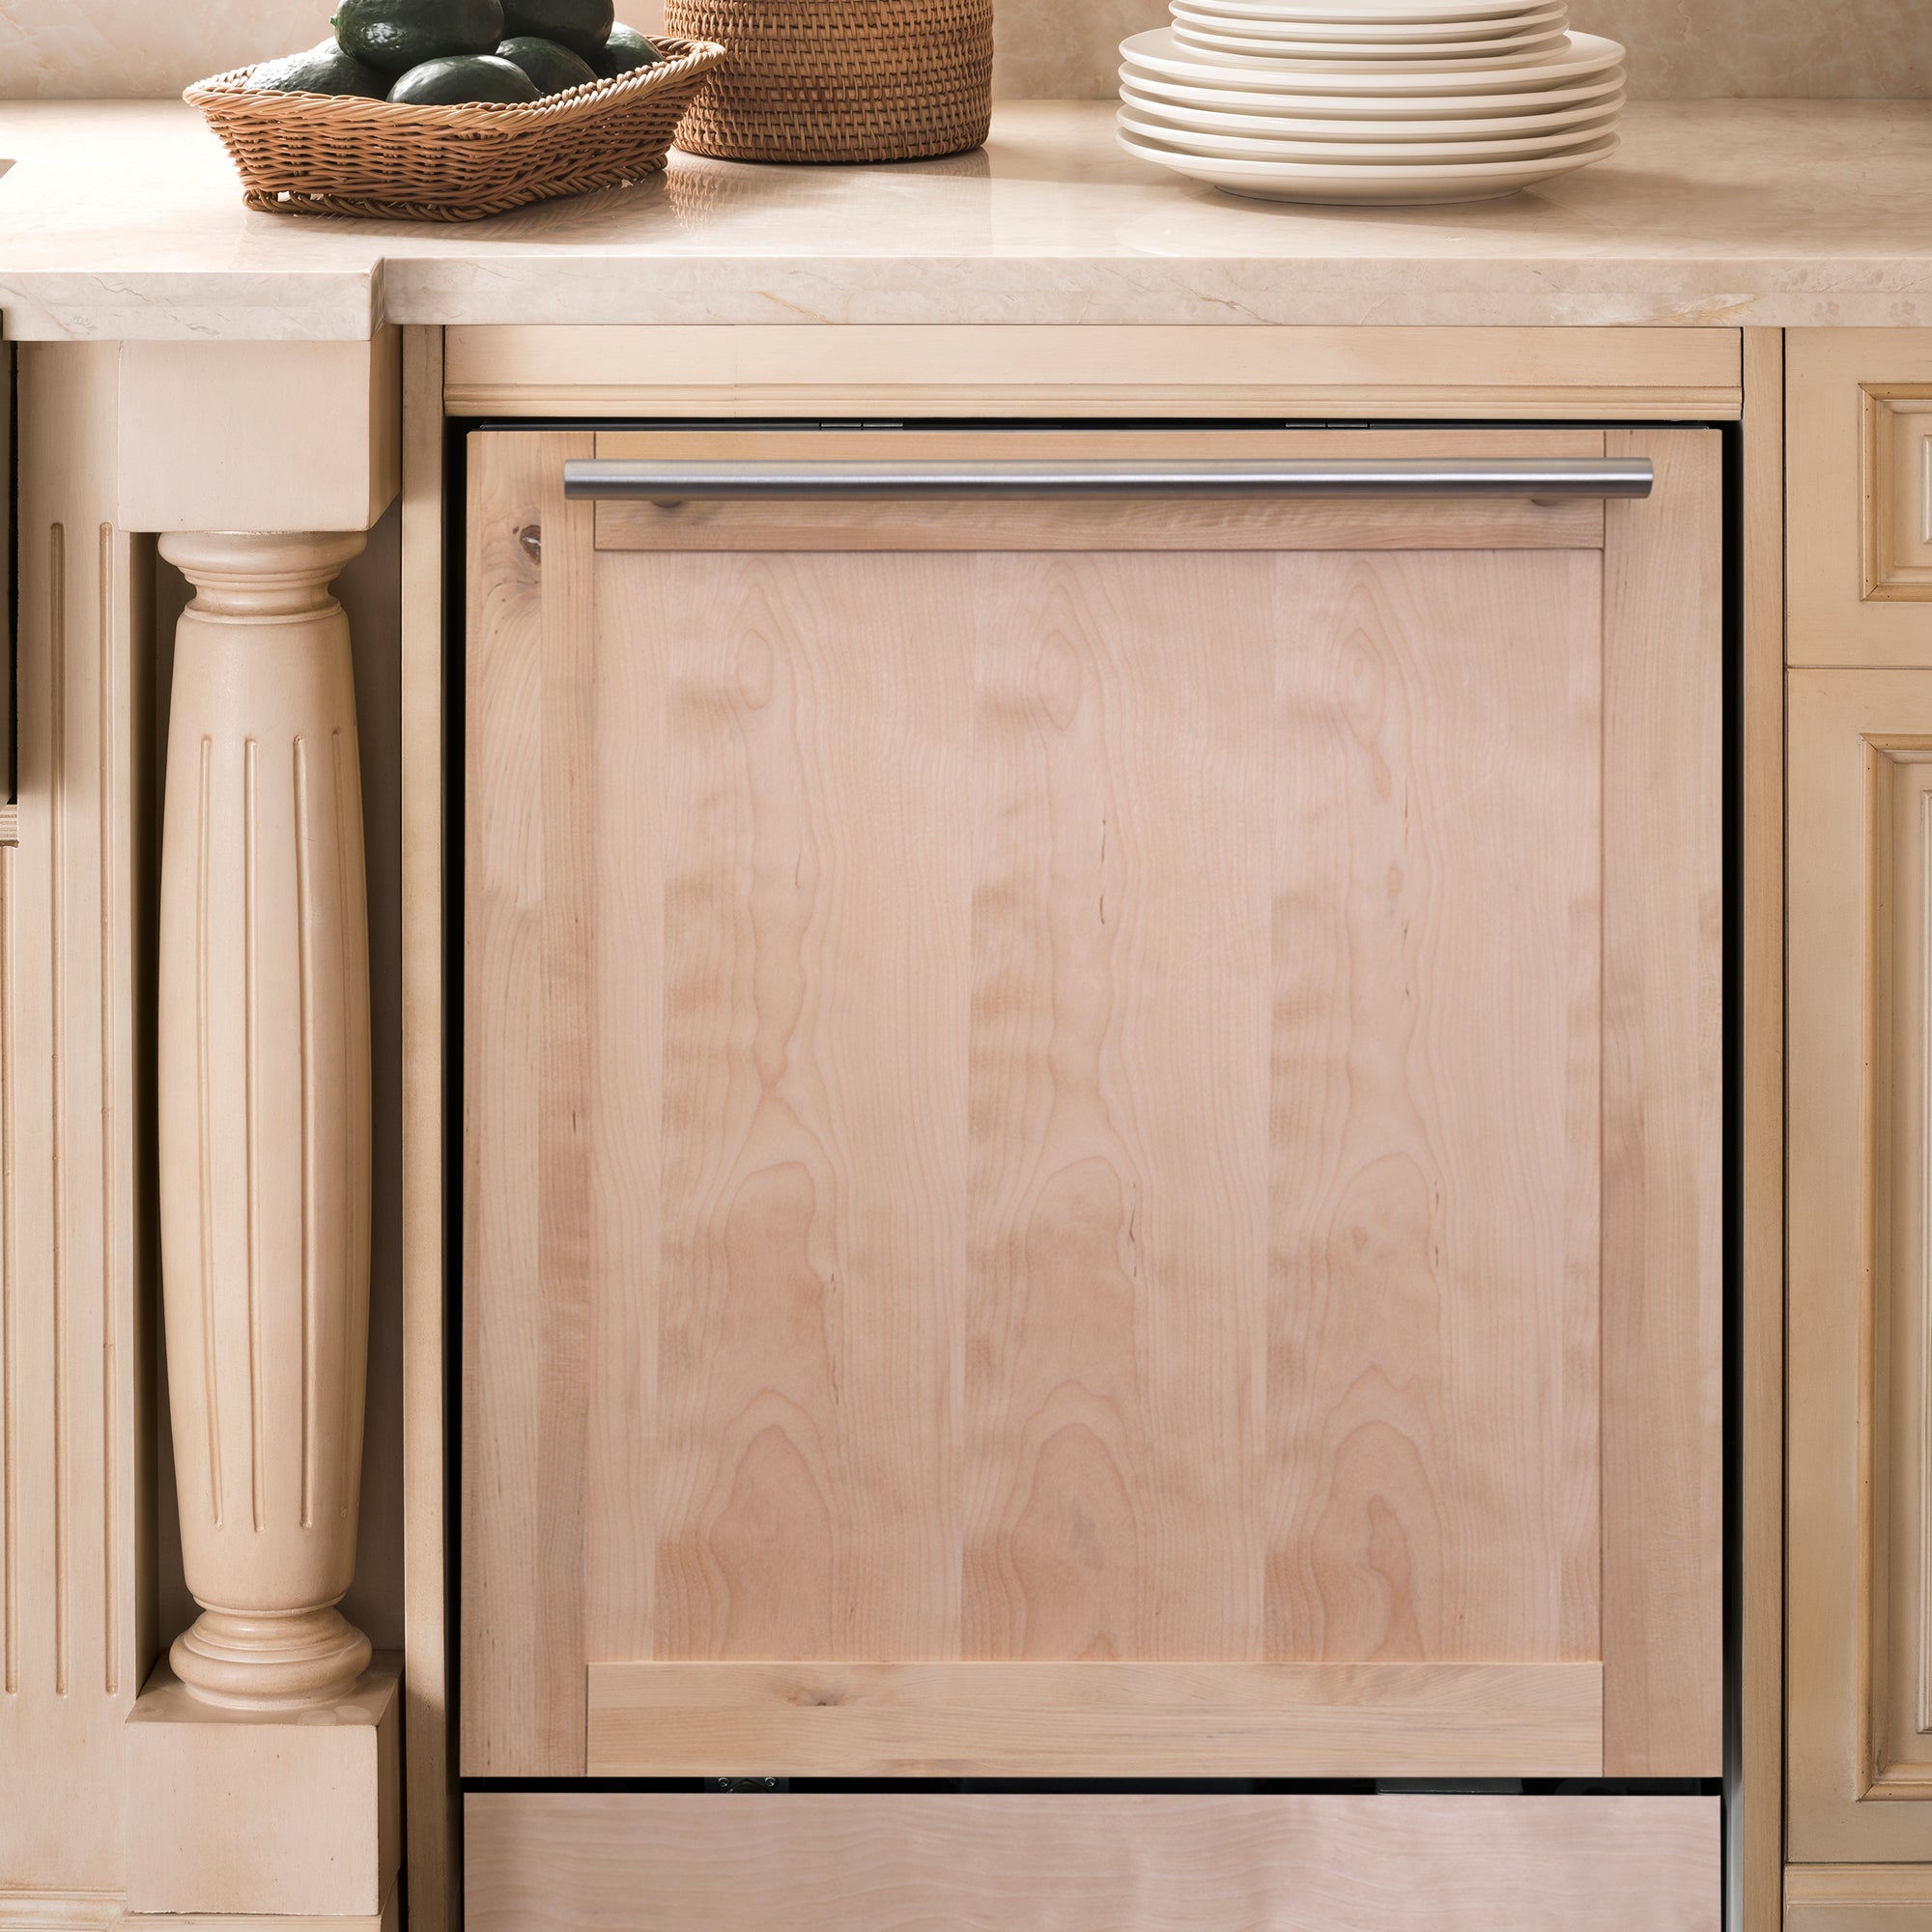 ZLINE 24 in. Top Control Dishwasher with Unfinished Wooden Panel and Modern Style Handle (DW-UF-24) built-in to matching wood cabinets in a kitchen.